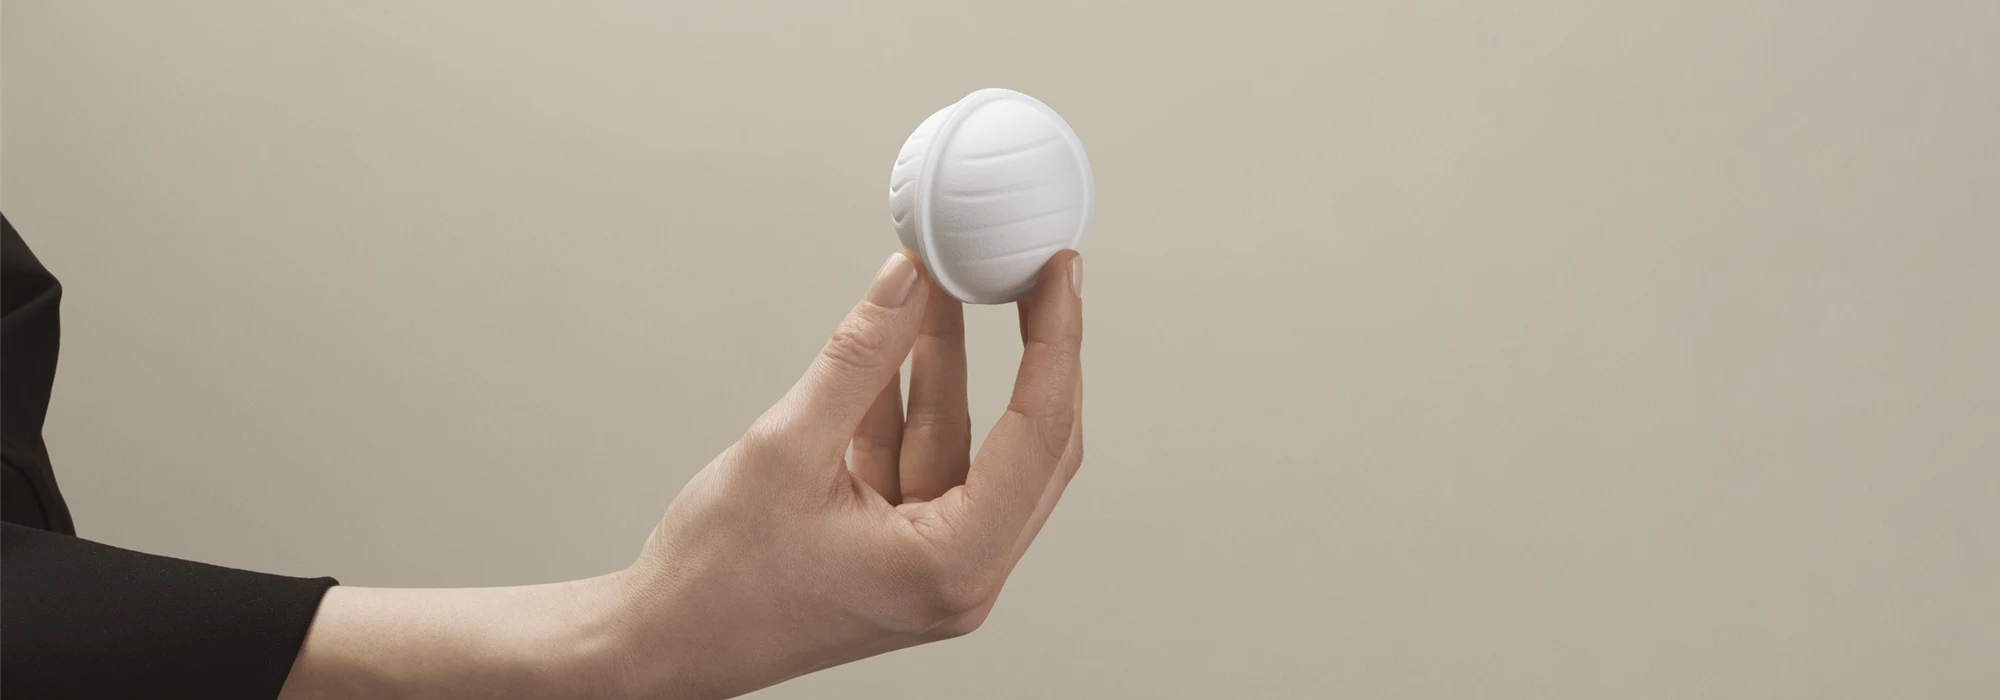 Hand holding a piece of wood-based packaging in the shape of a ball